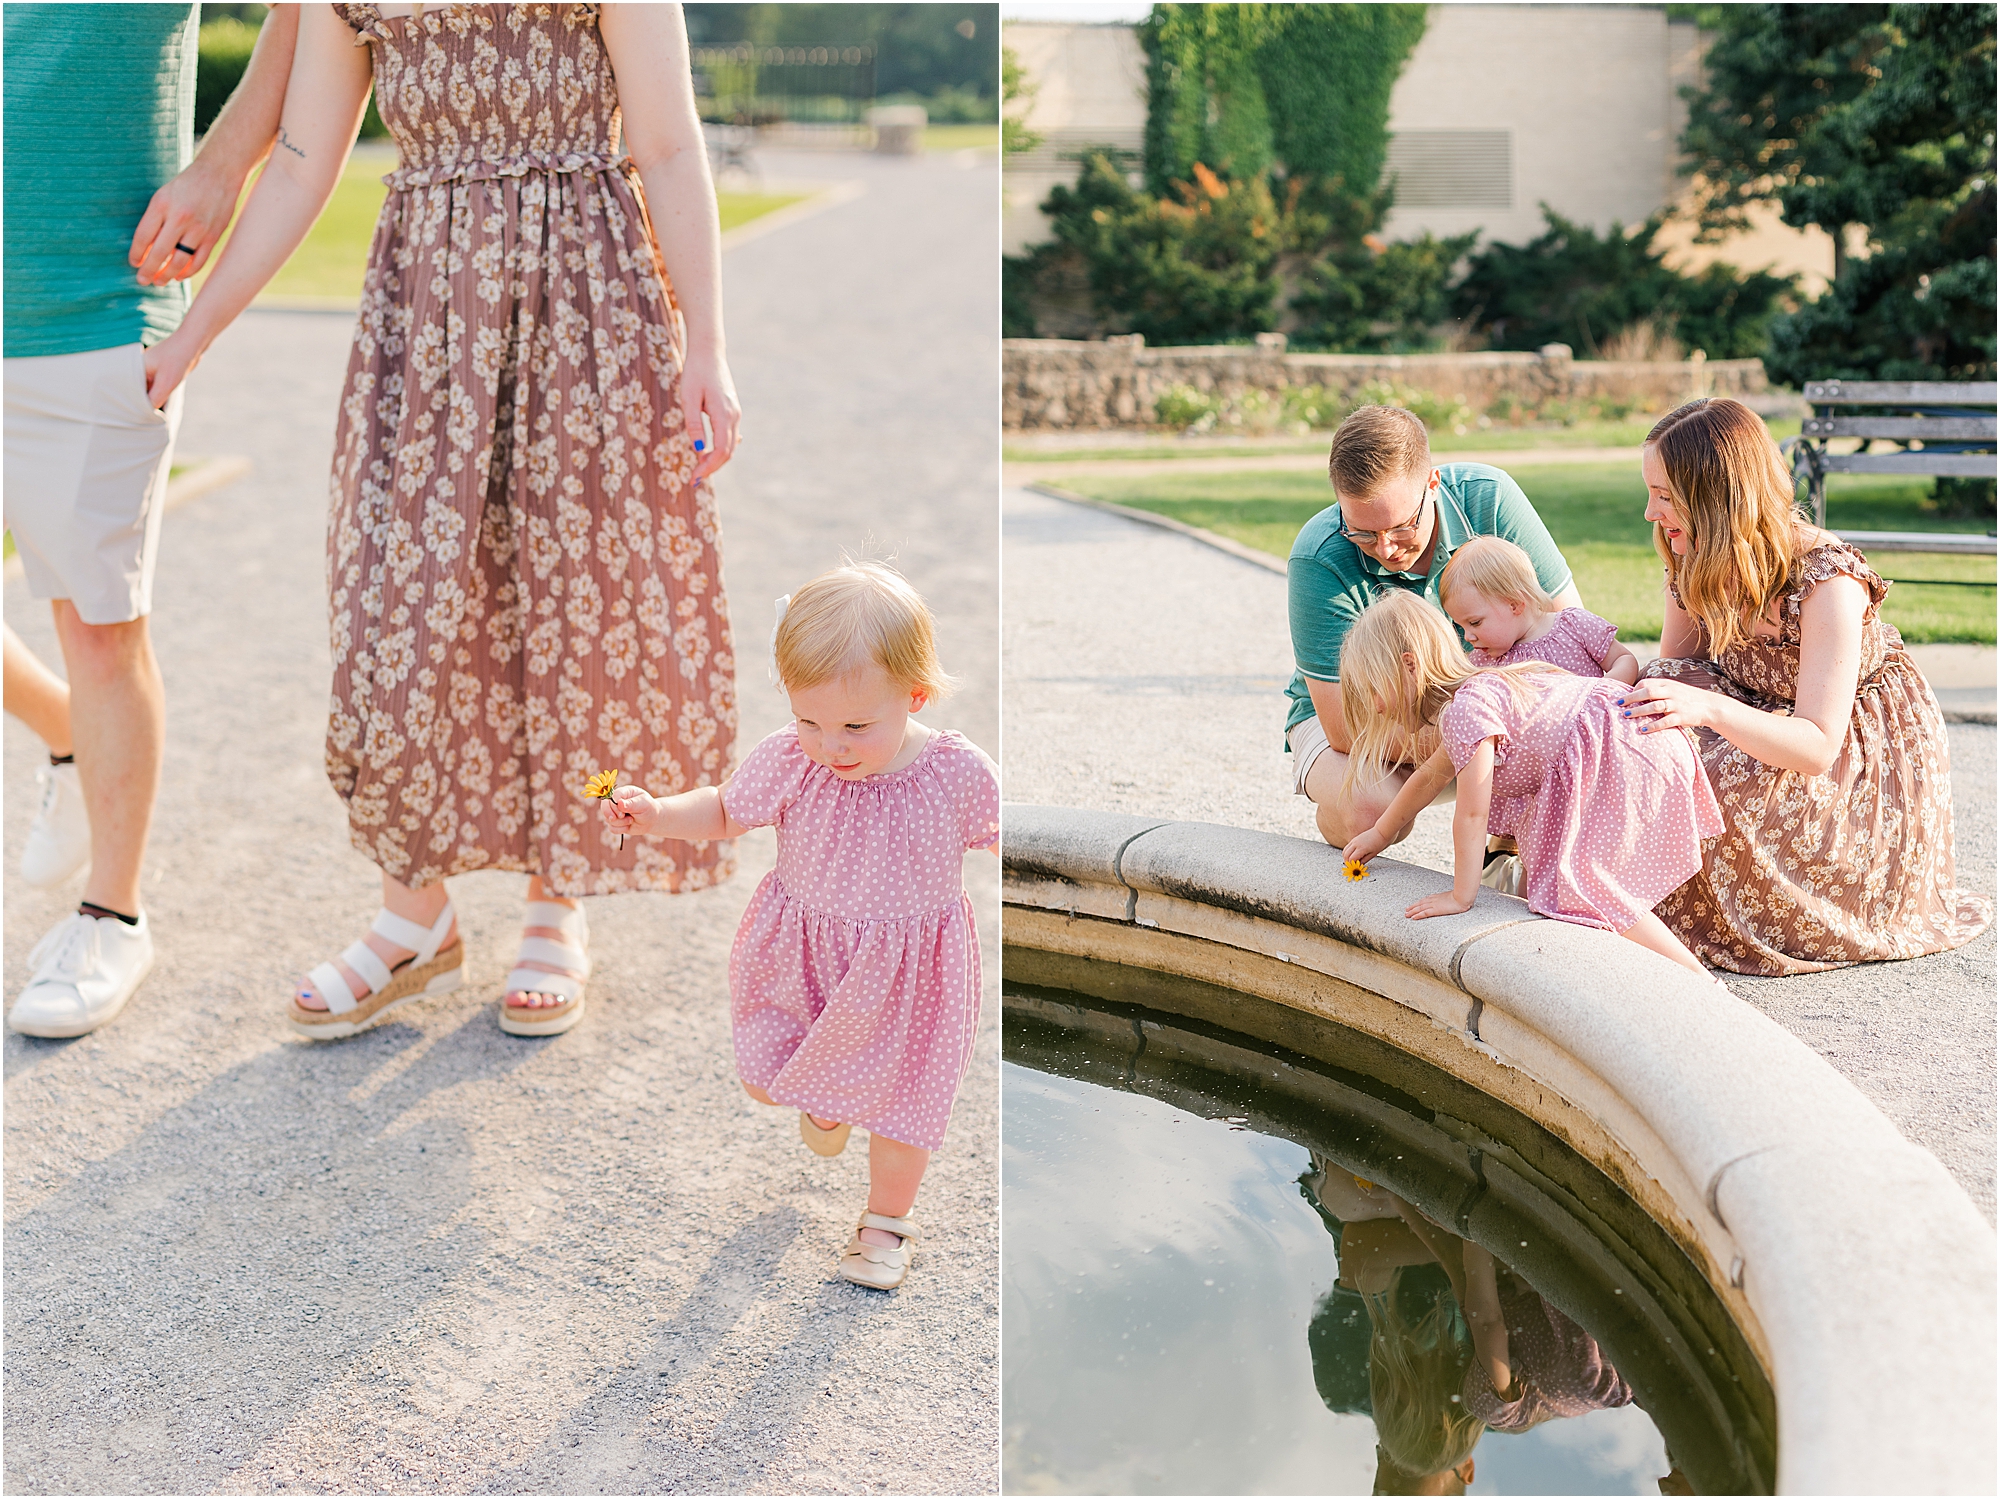 A summer family photo session in front of a fish pond in the rose garden.